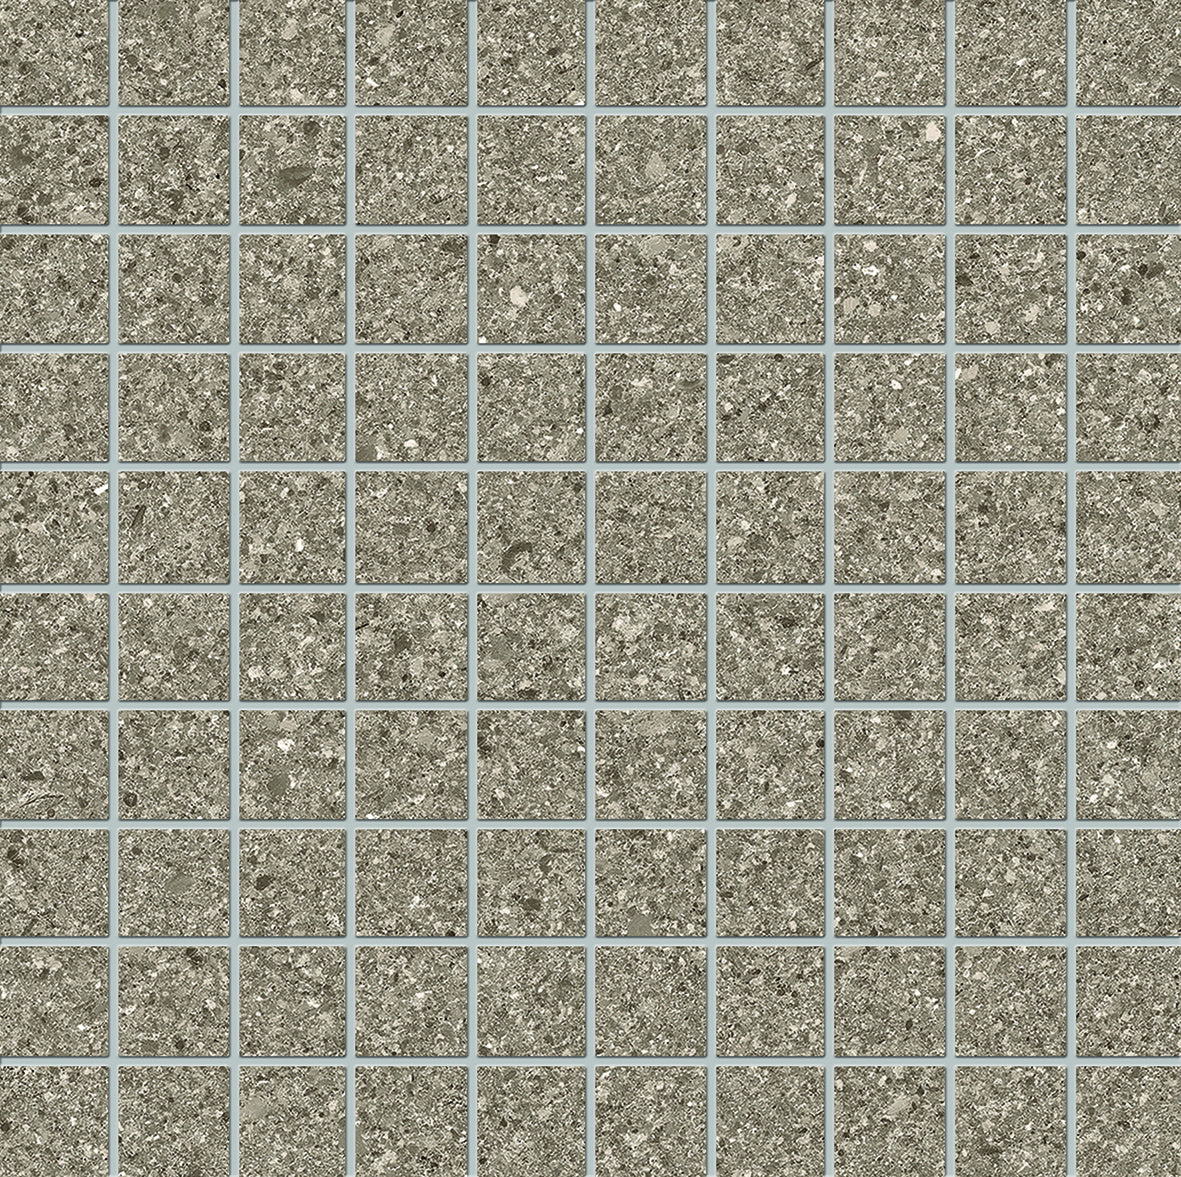 Cement Stone 1x1 Porcelain Mosaic Taupe Sample